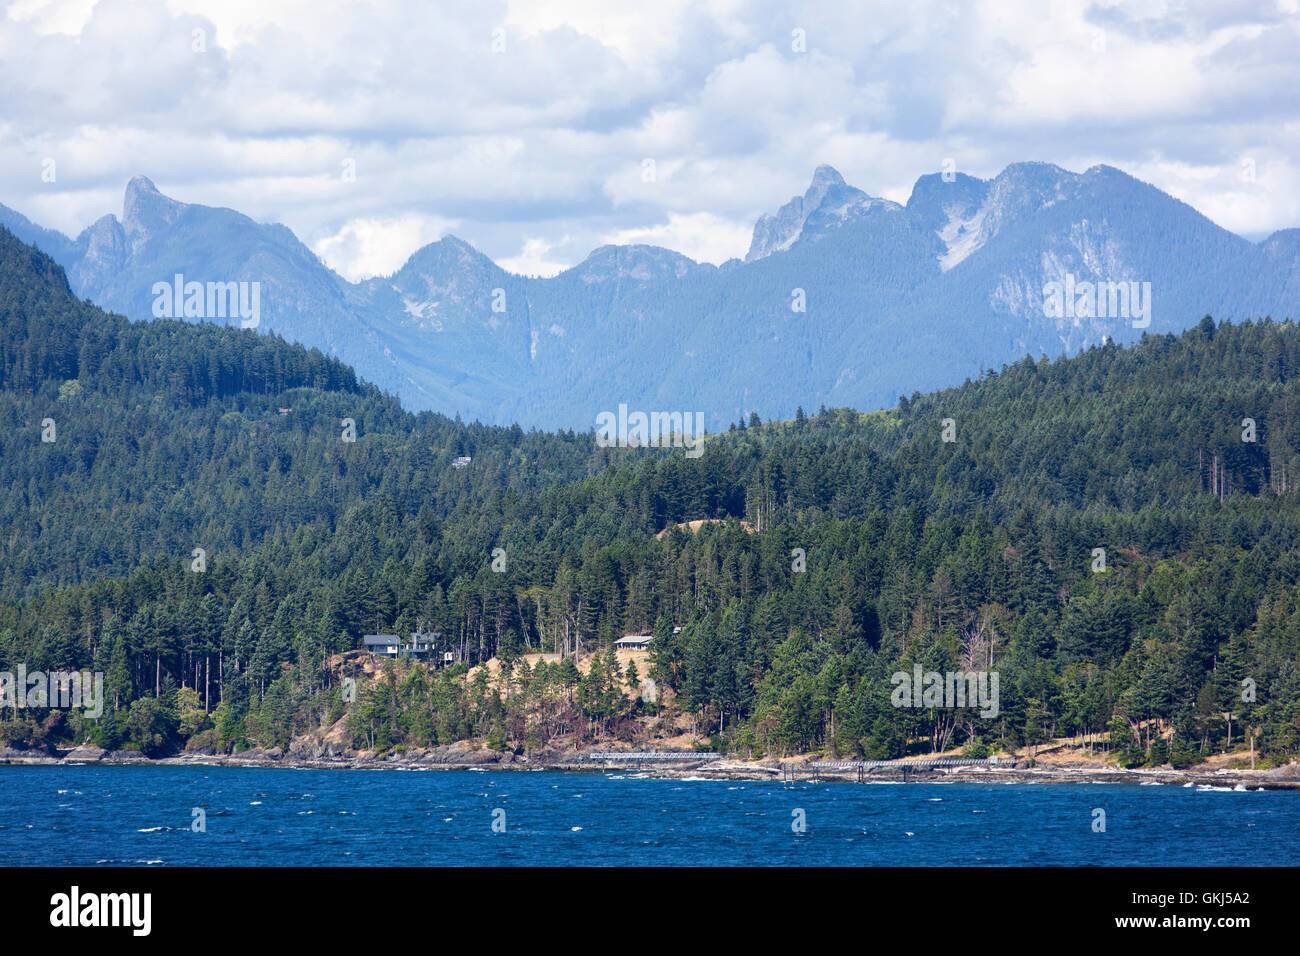 The view of greater area outside Vancouver (British Columbia, Canada). Stock Photo